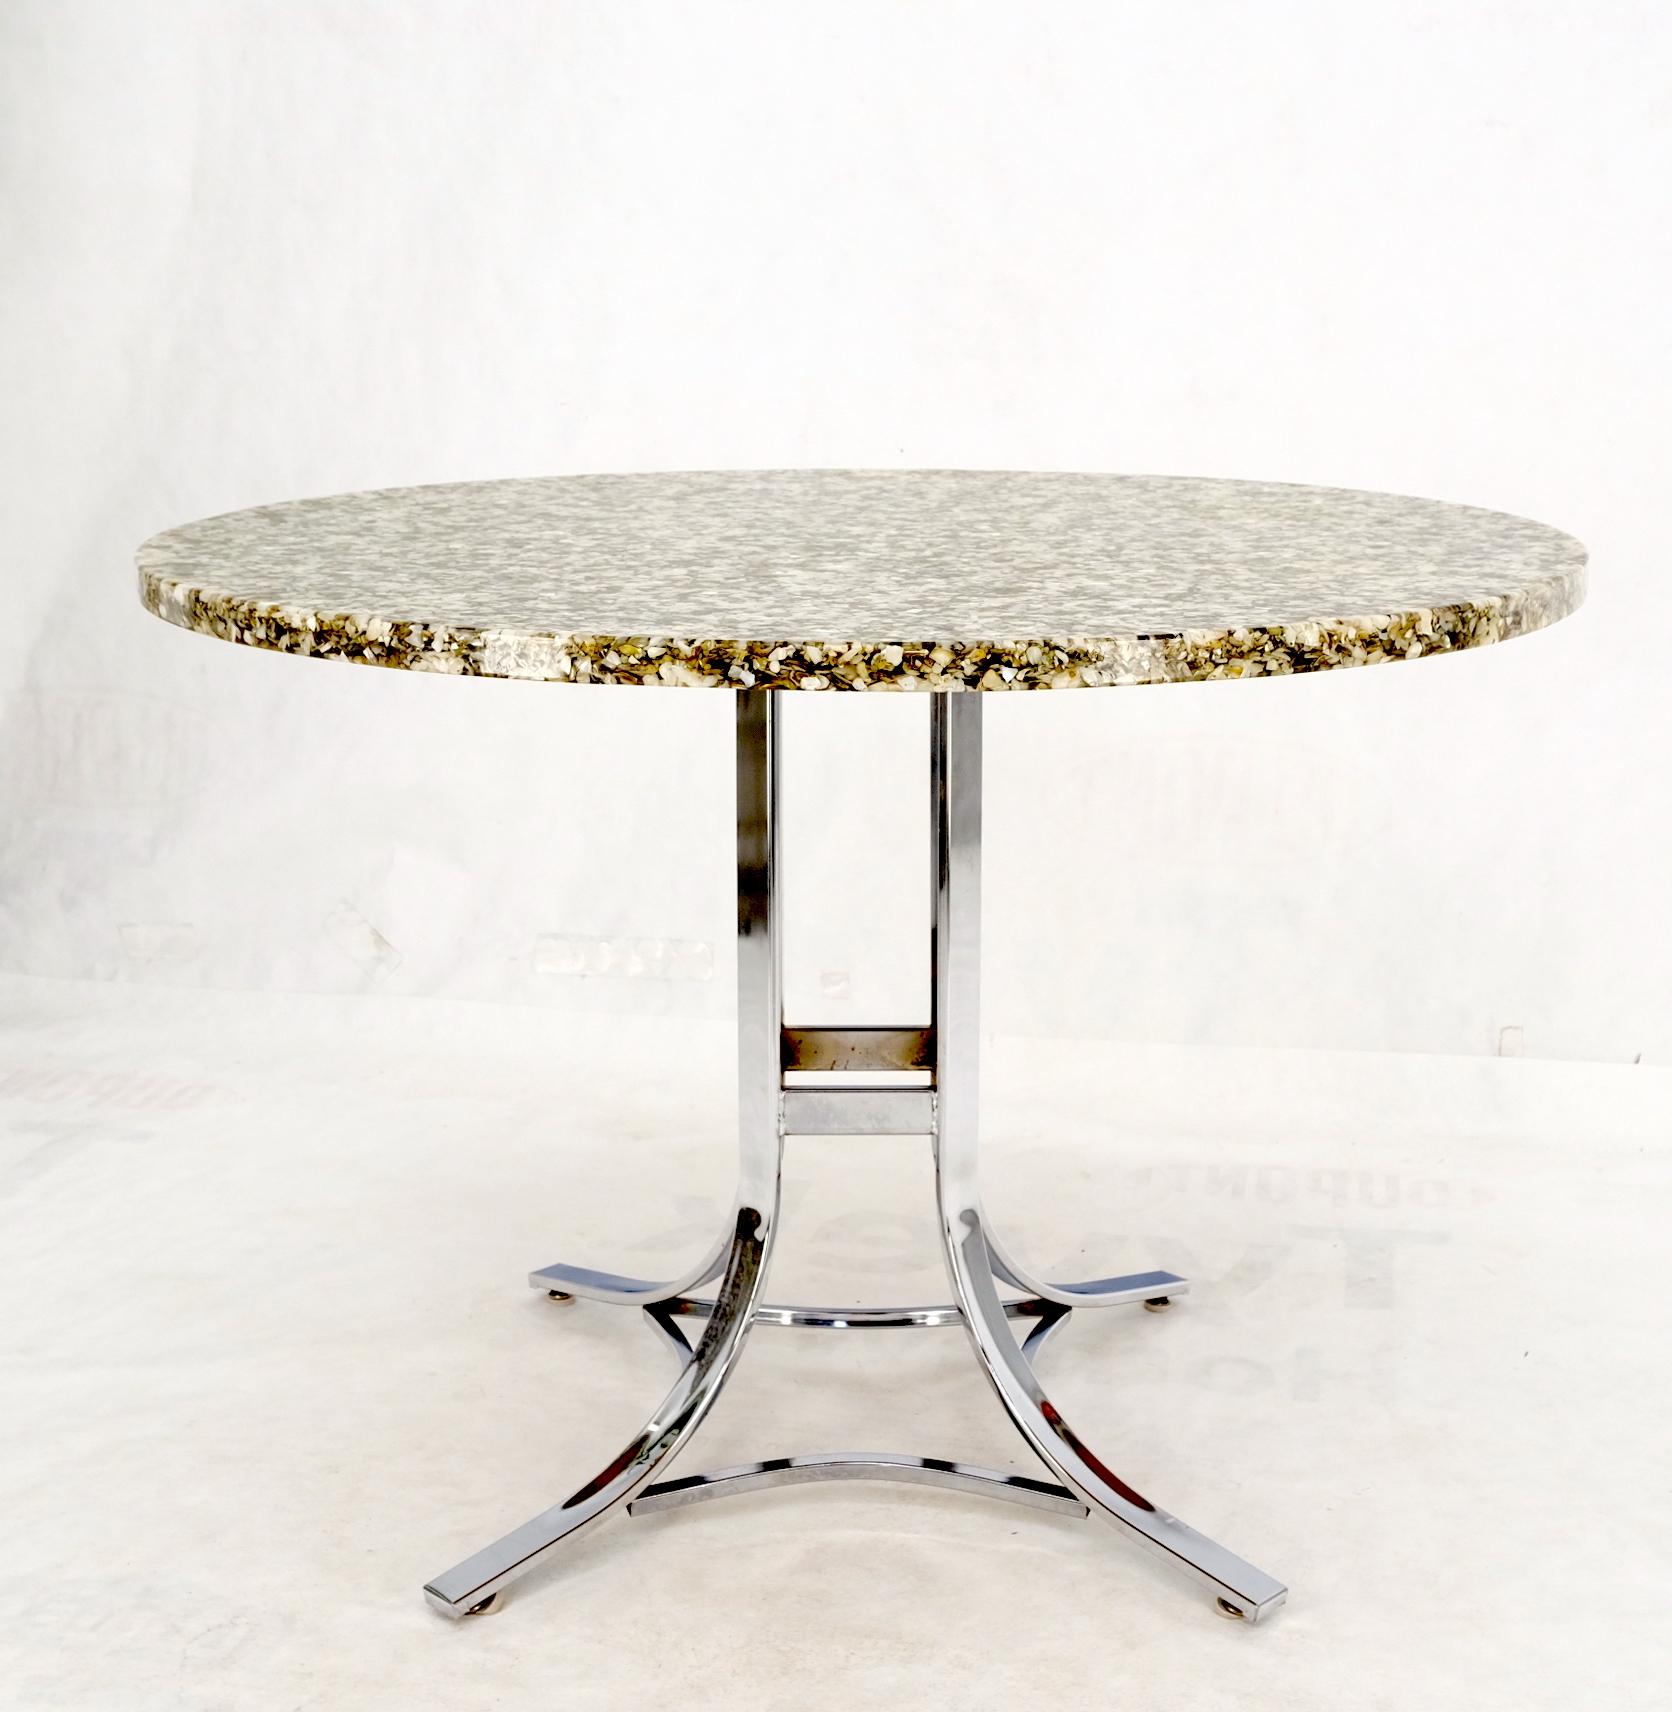 Abalone Shell Resin Fusion Cast Round Top Table on Chrome Base Mid-Century Moder For Sale 3